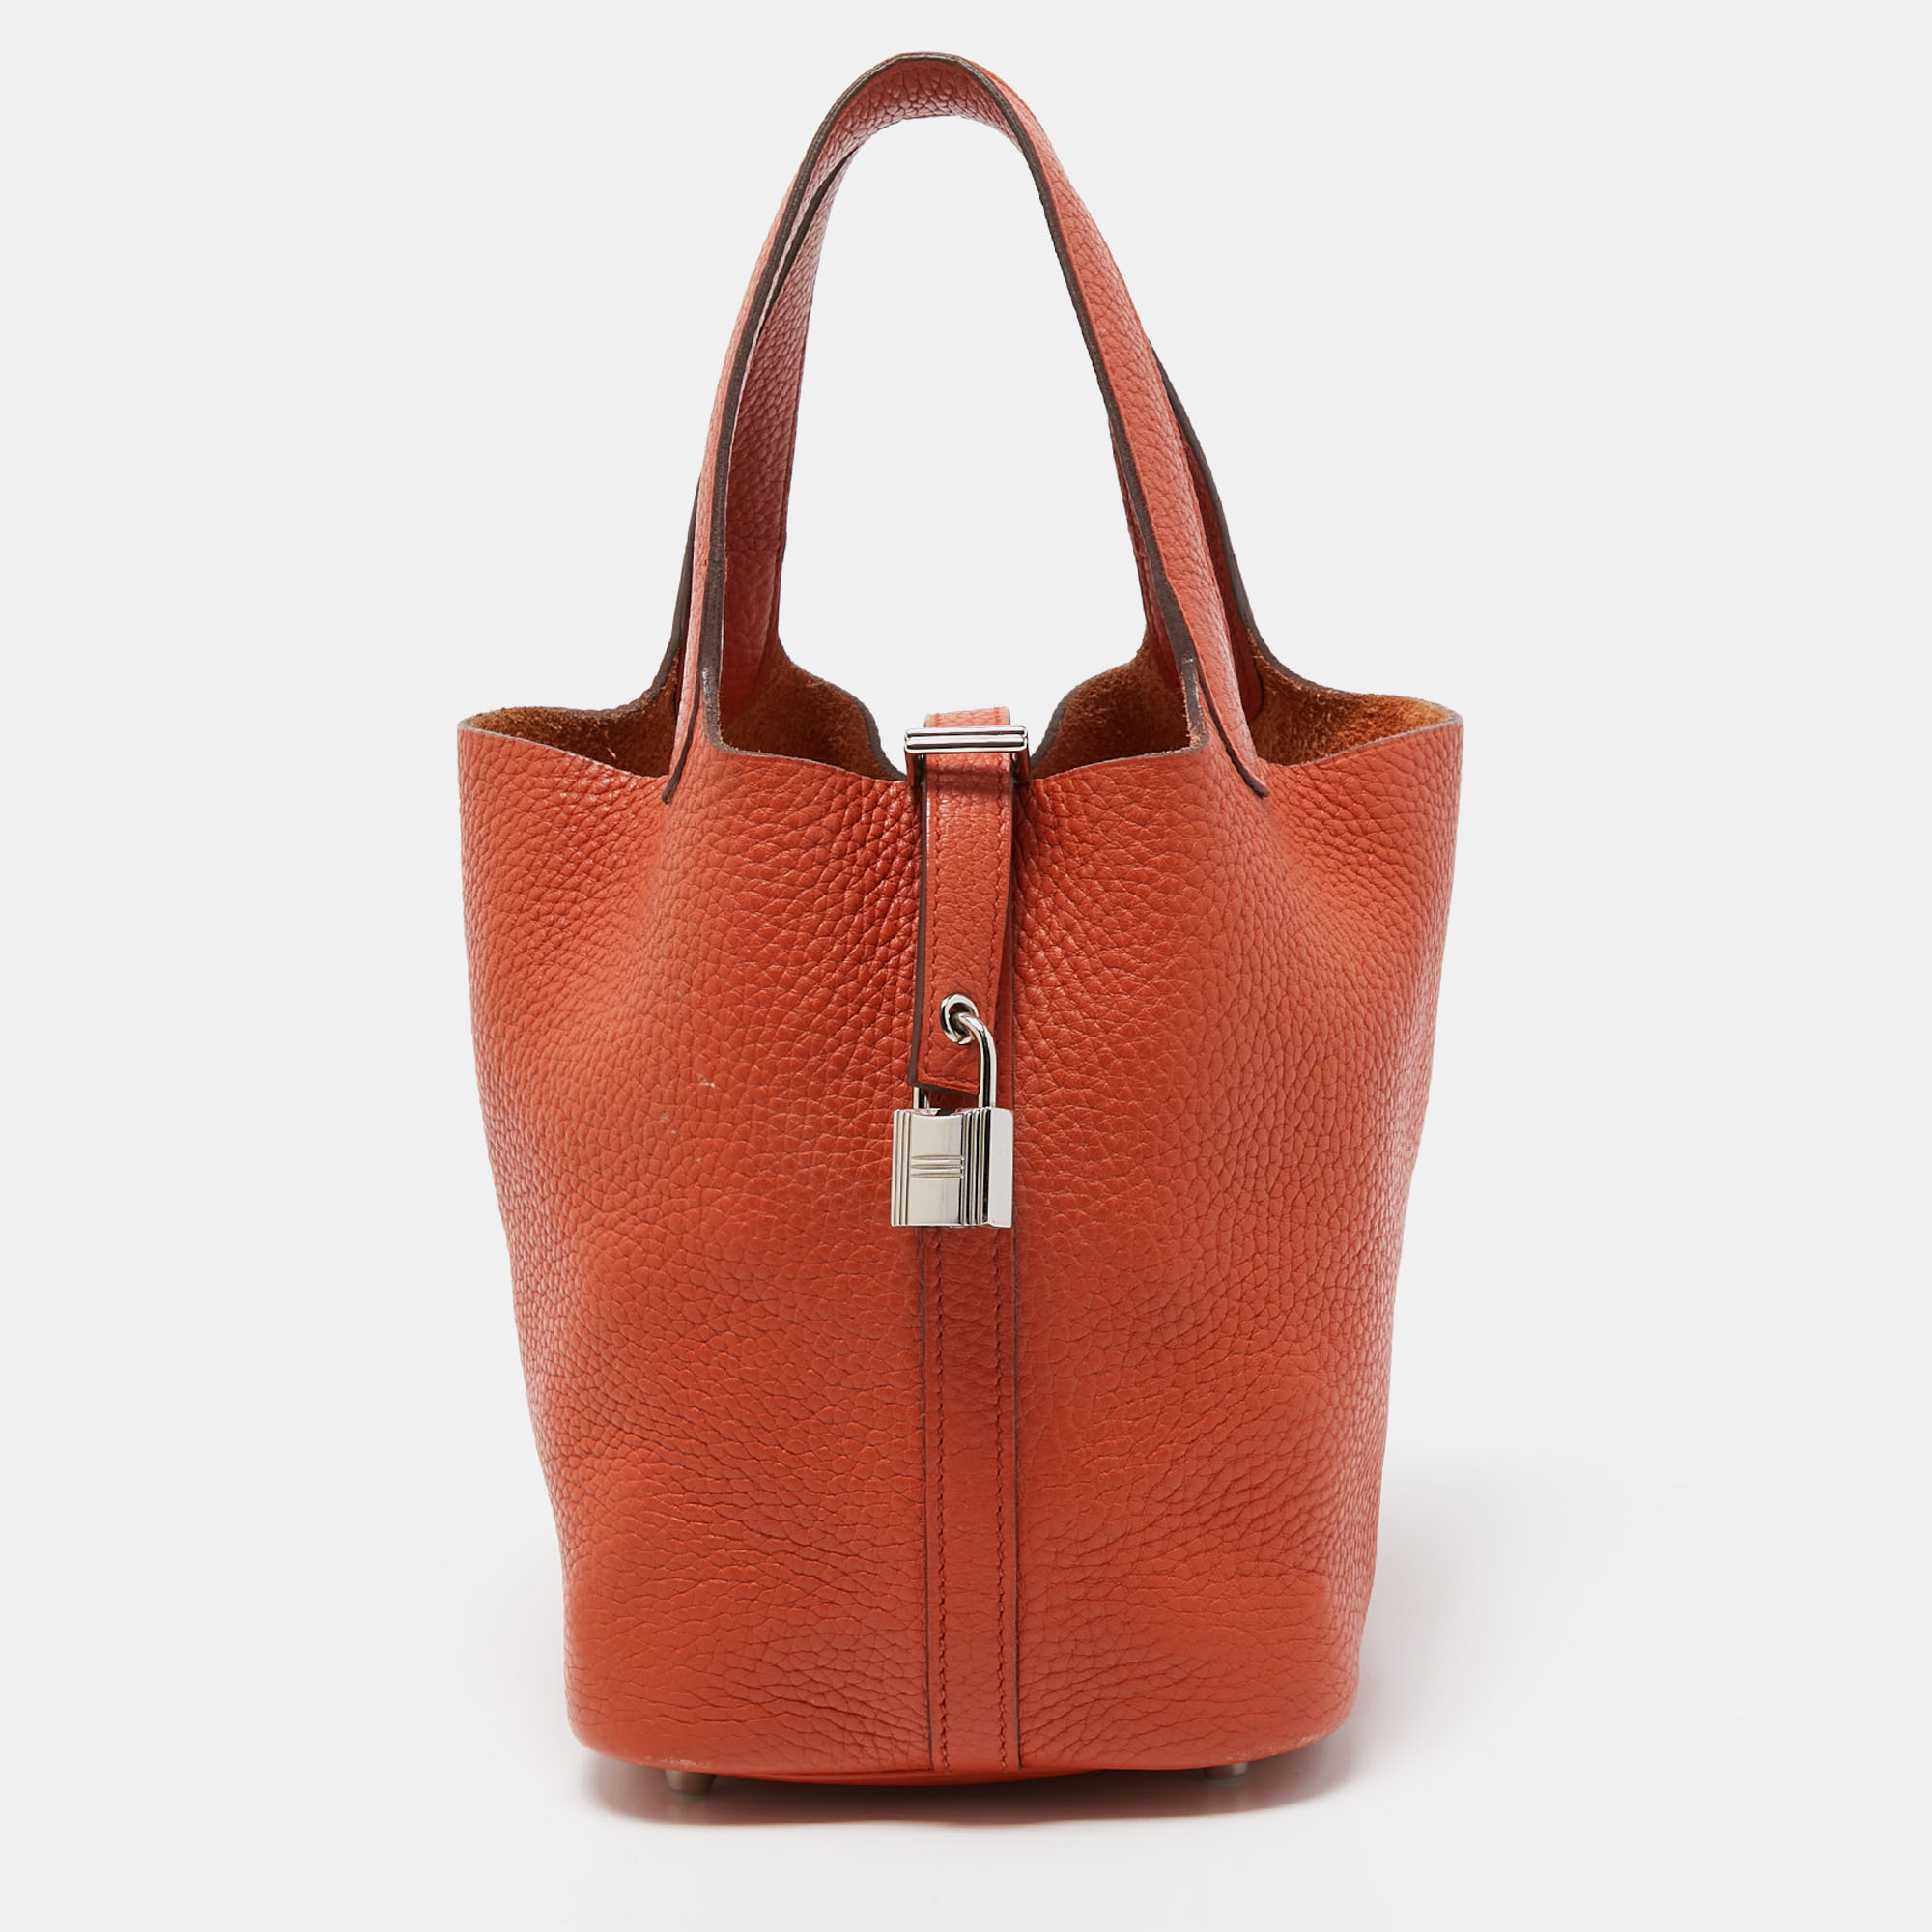 Hermes Terre Battue Taurillon Clemence Leather Picotin Lock 18 Bag